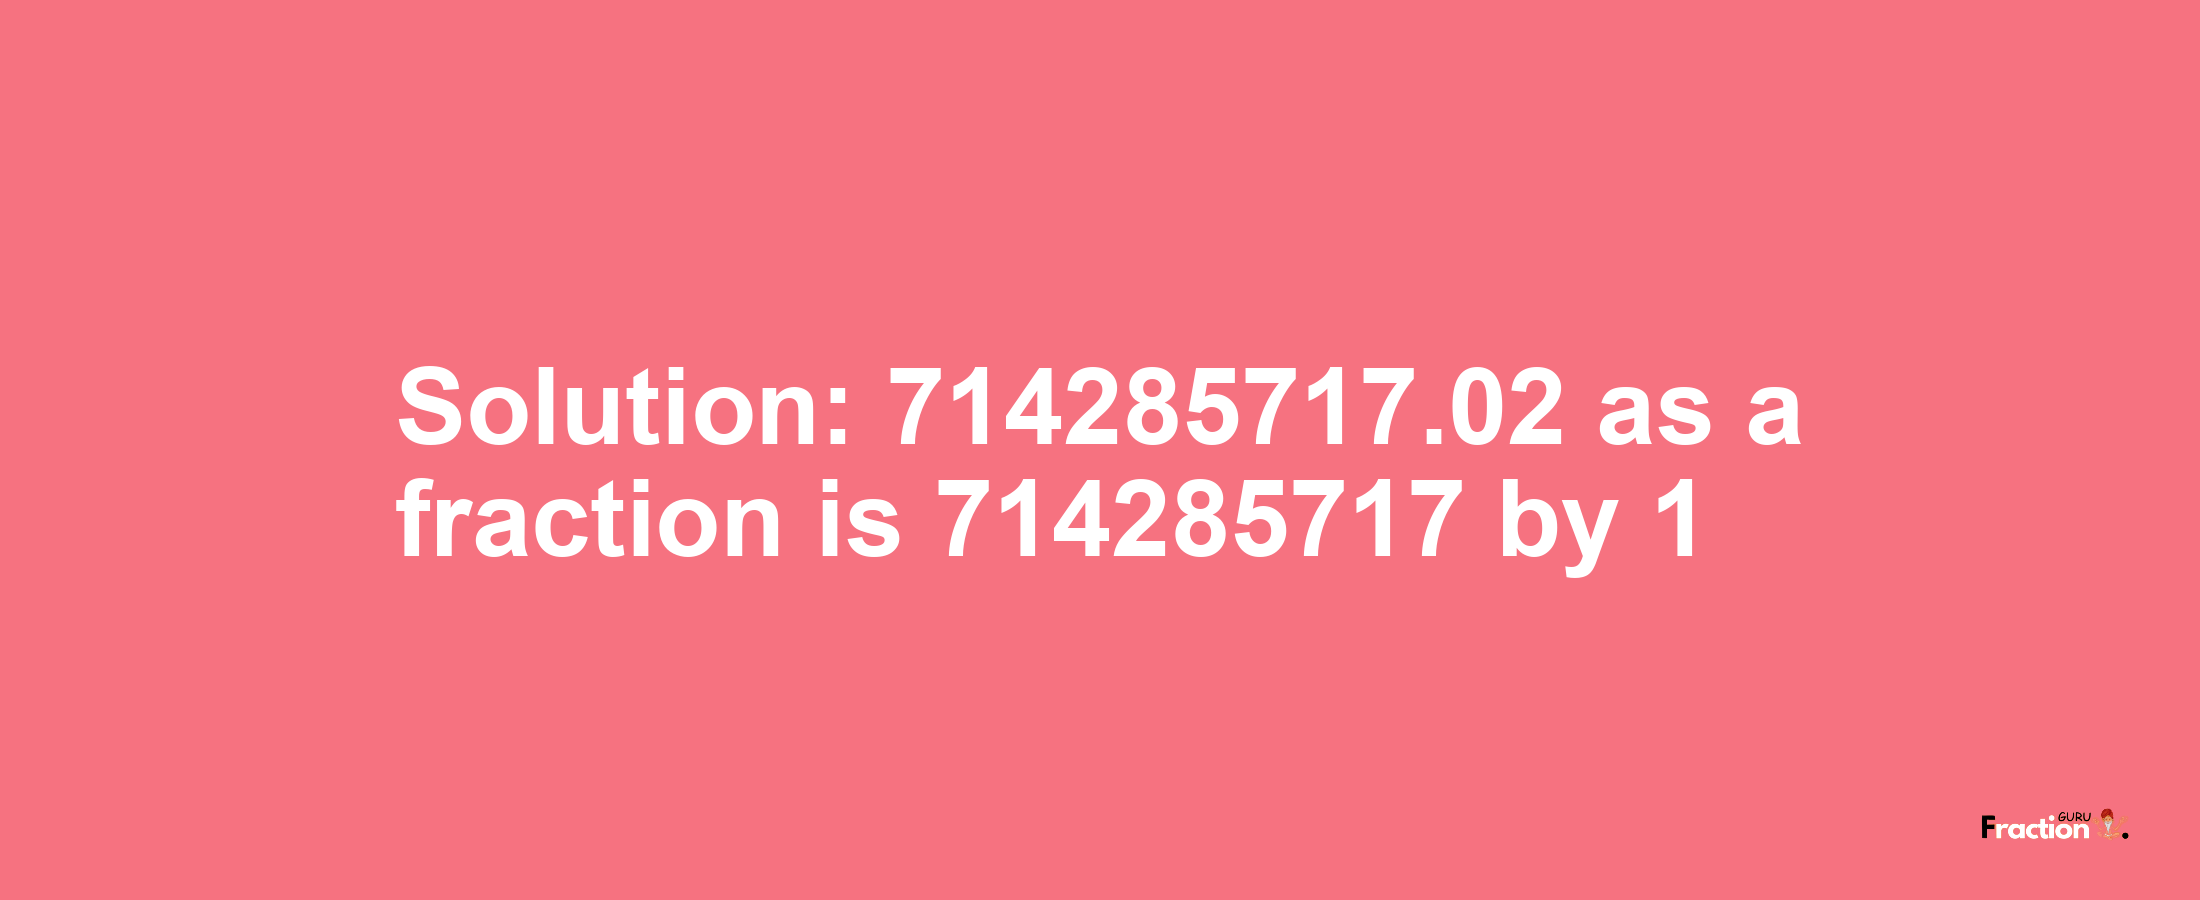 Solution:714285717.02 as a fraction is 714285717/1